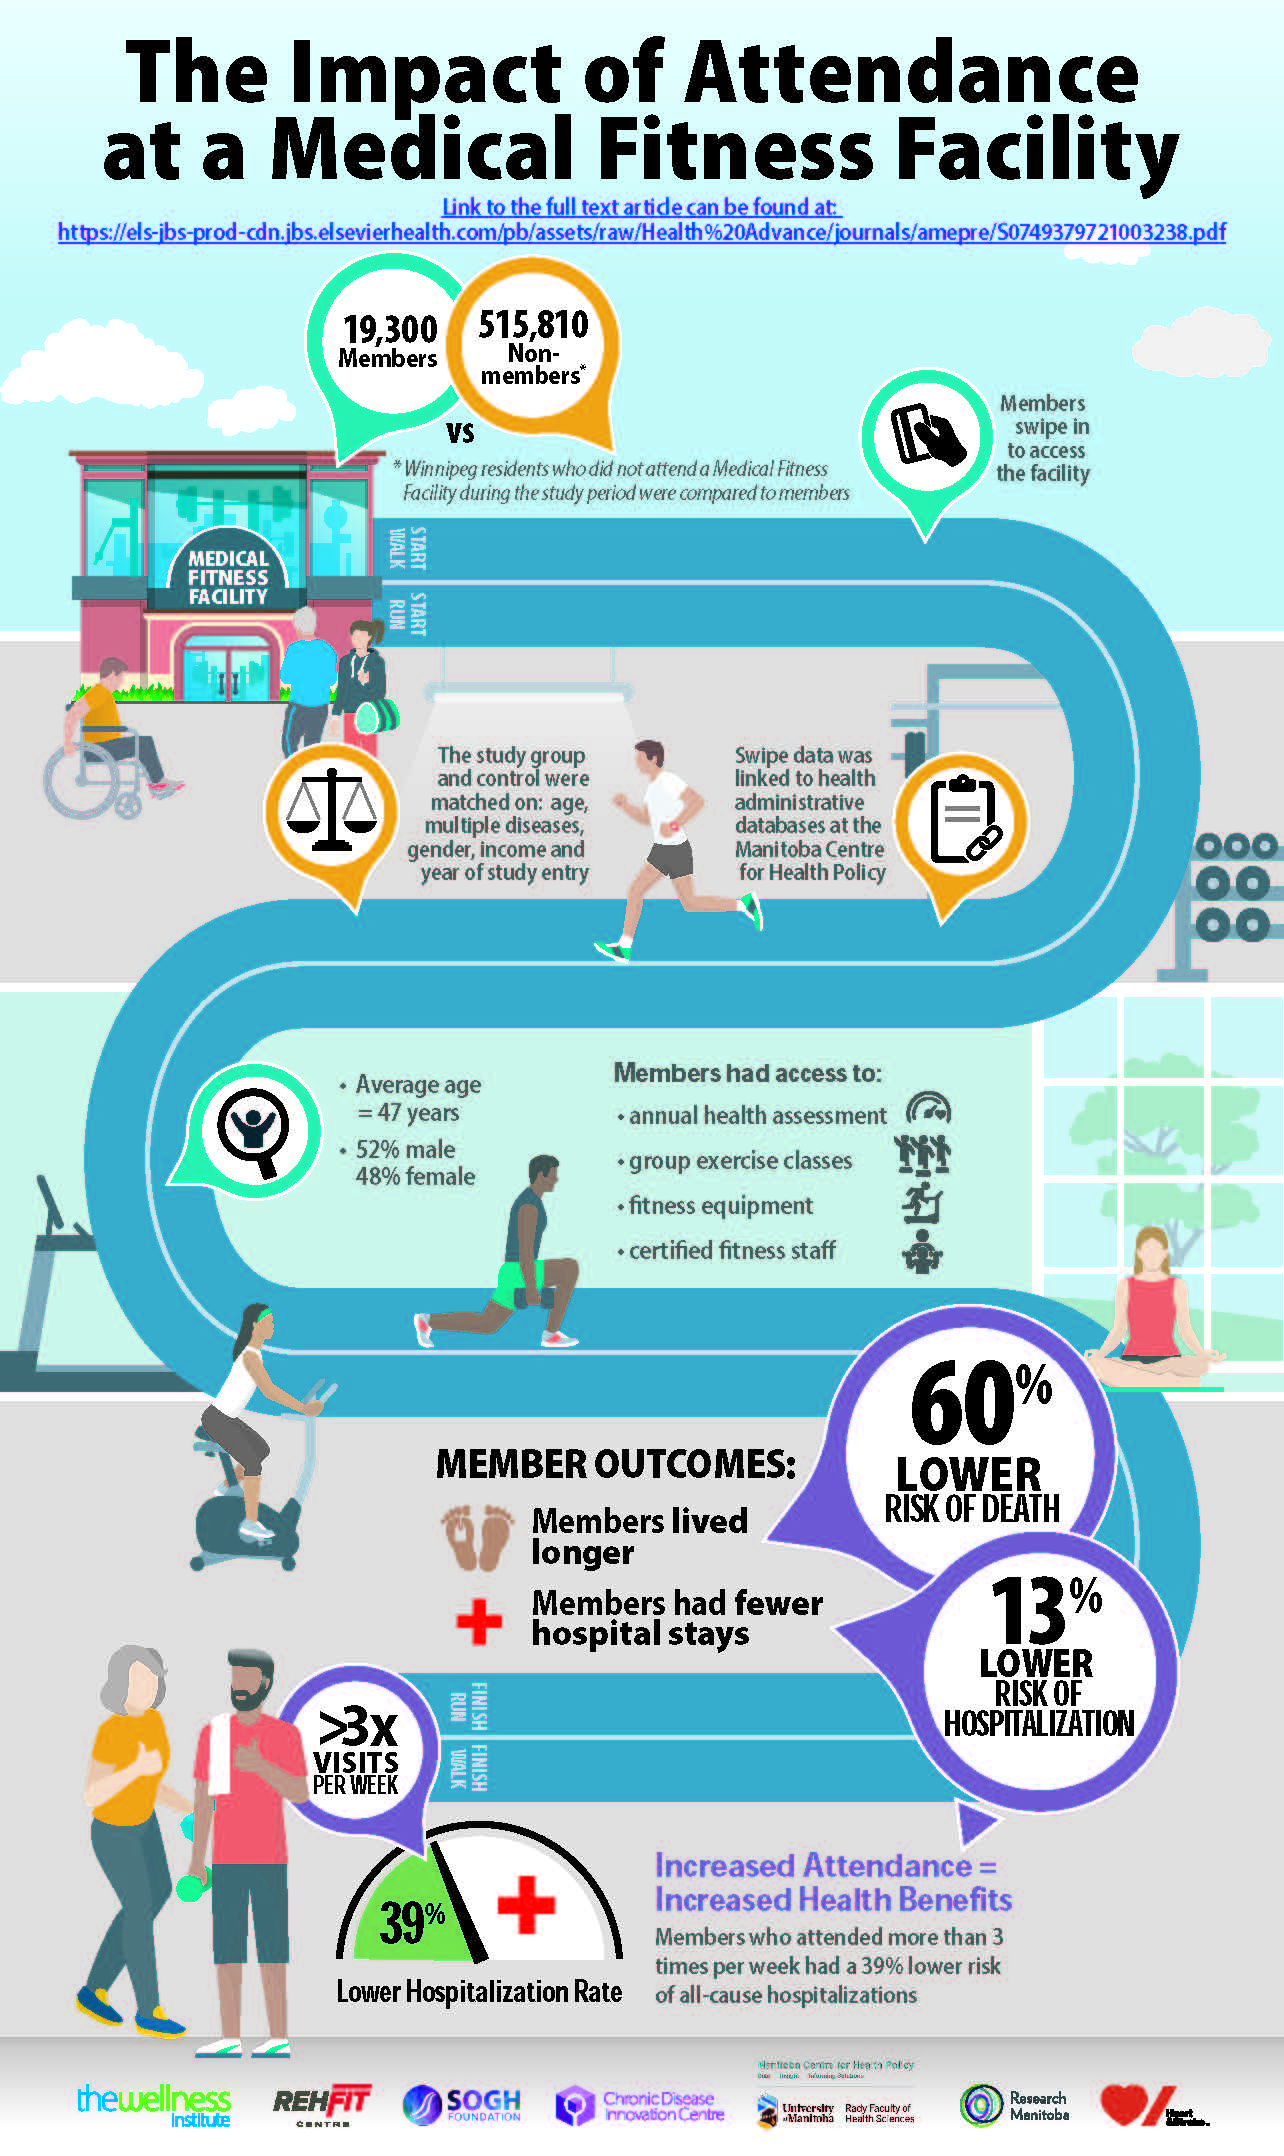 Benefits of Exercise for Older Adults with Chronic Conditions